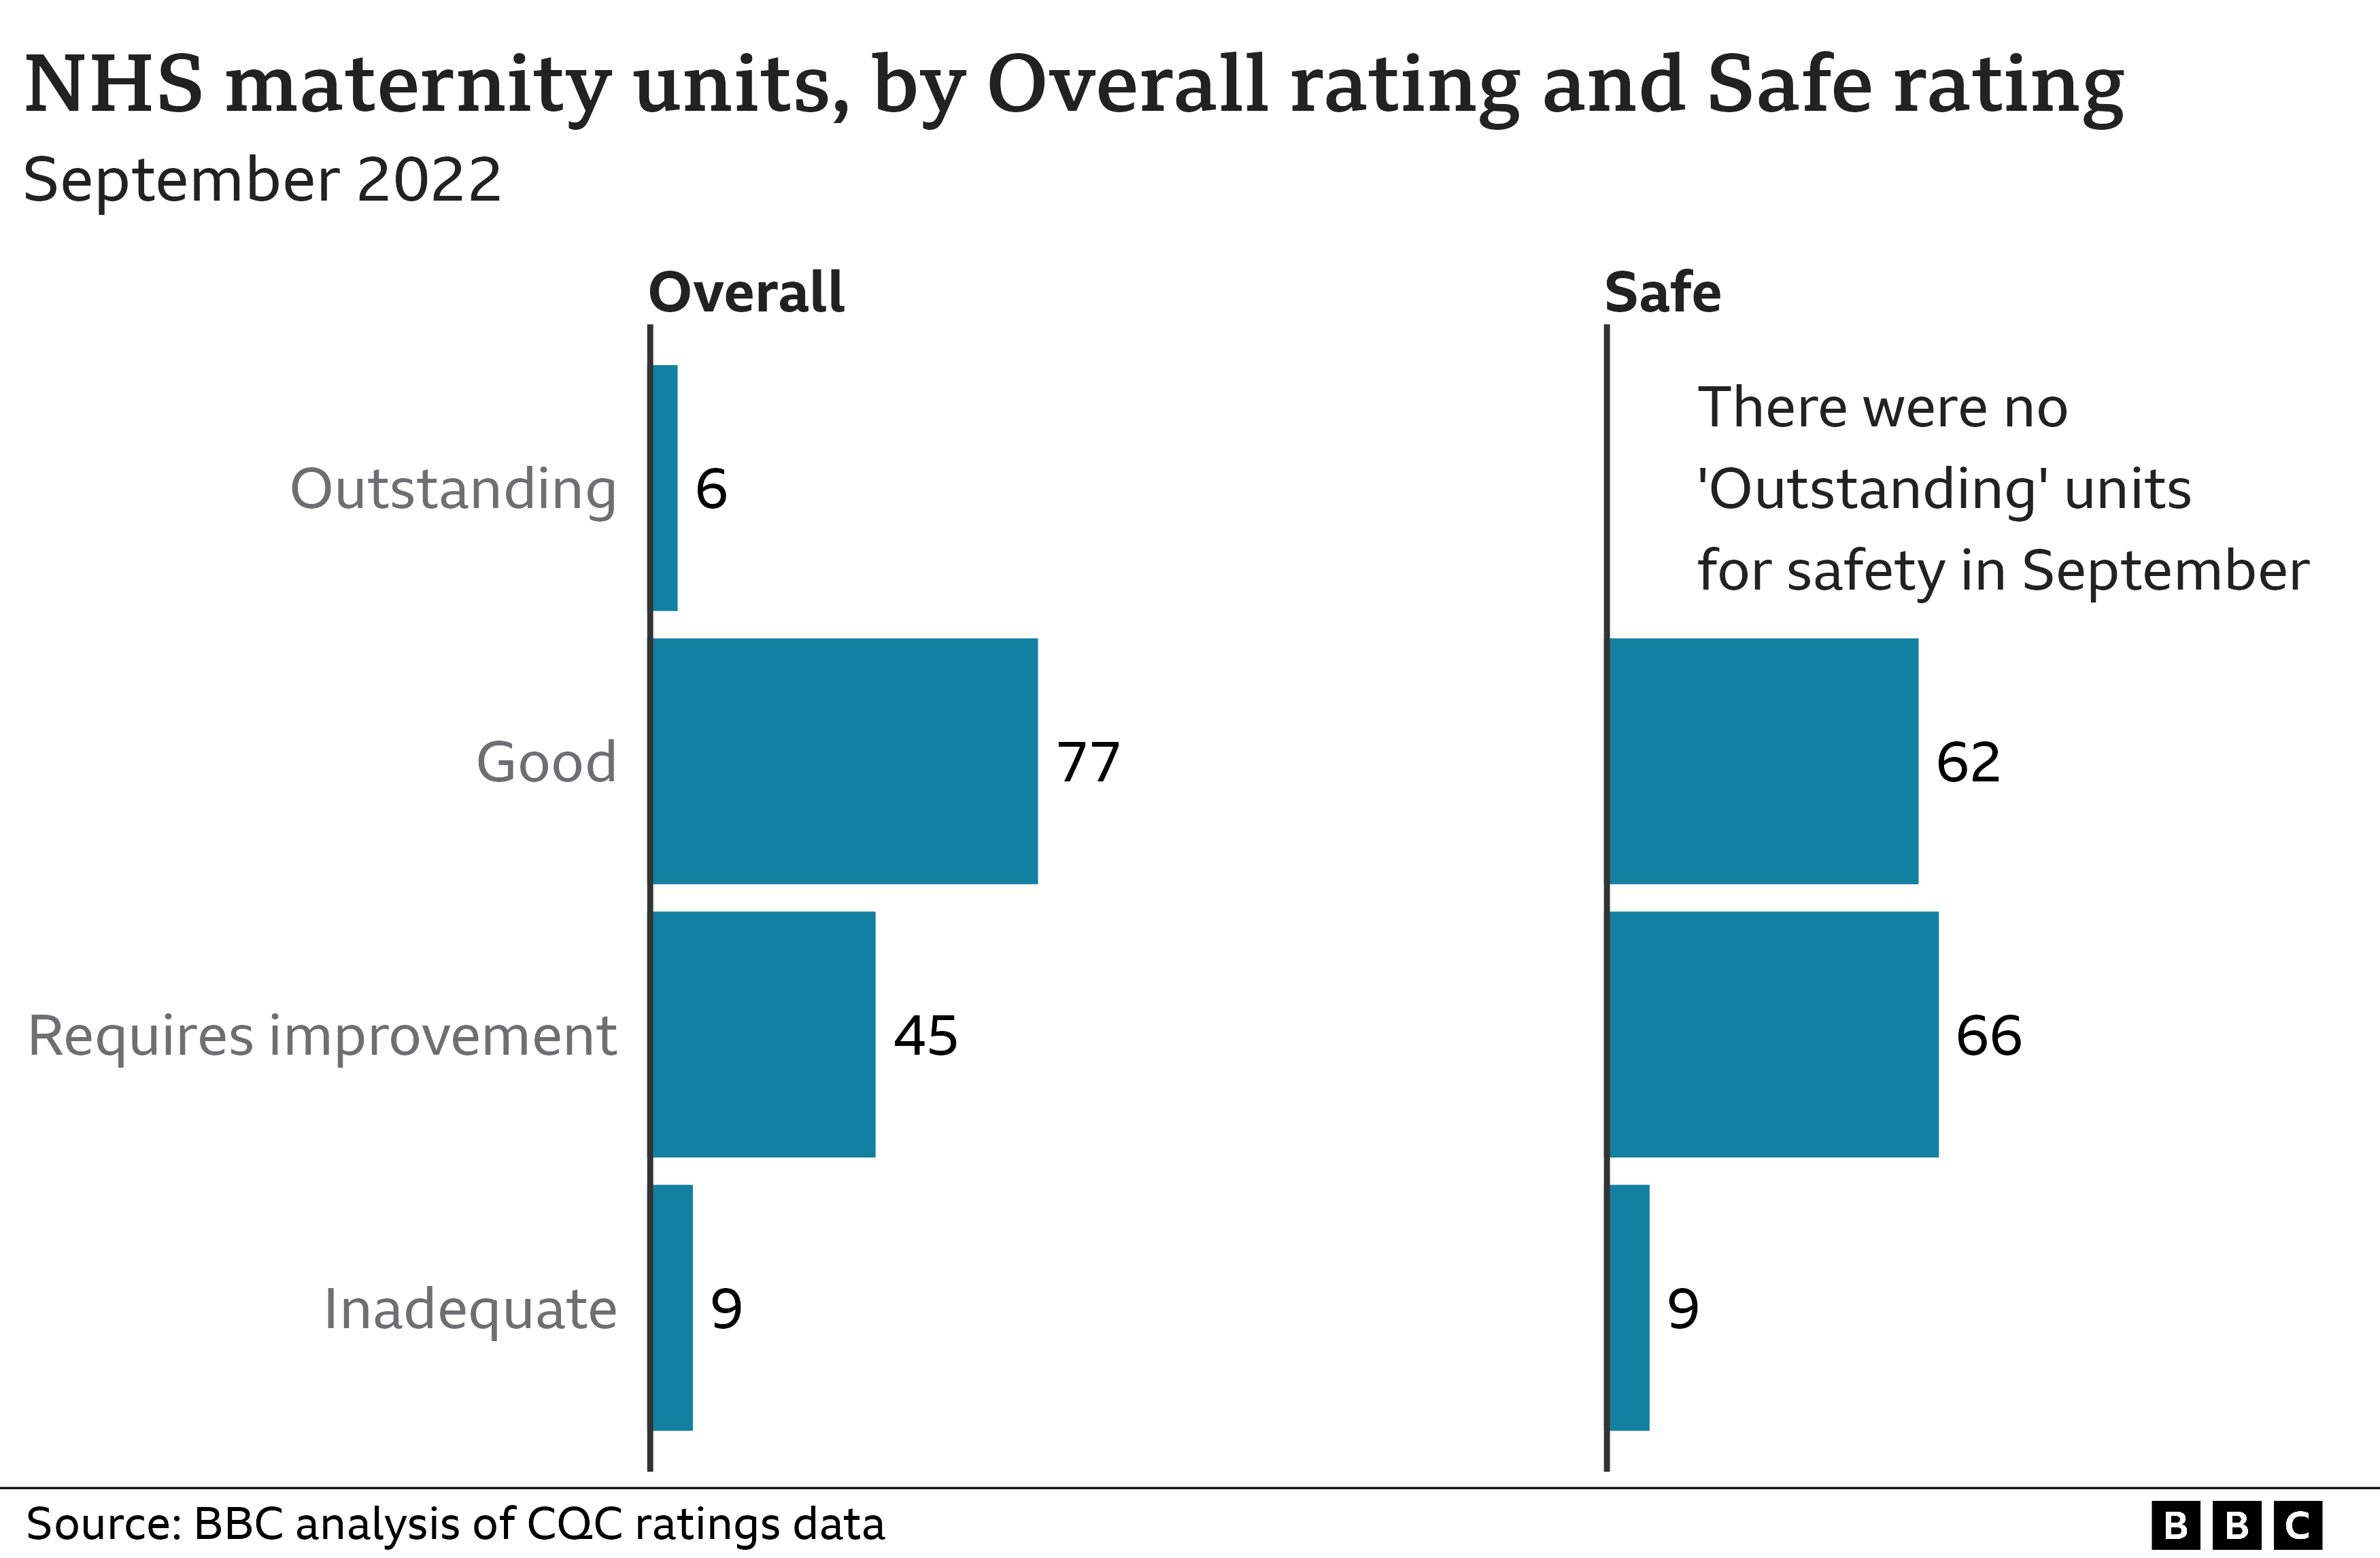 Chart showing NHS maternity units by Overall and Safe rating